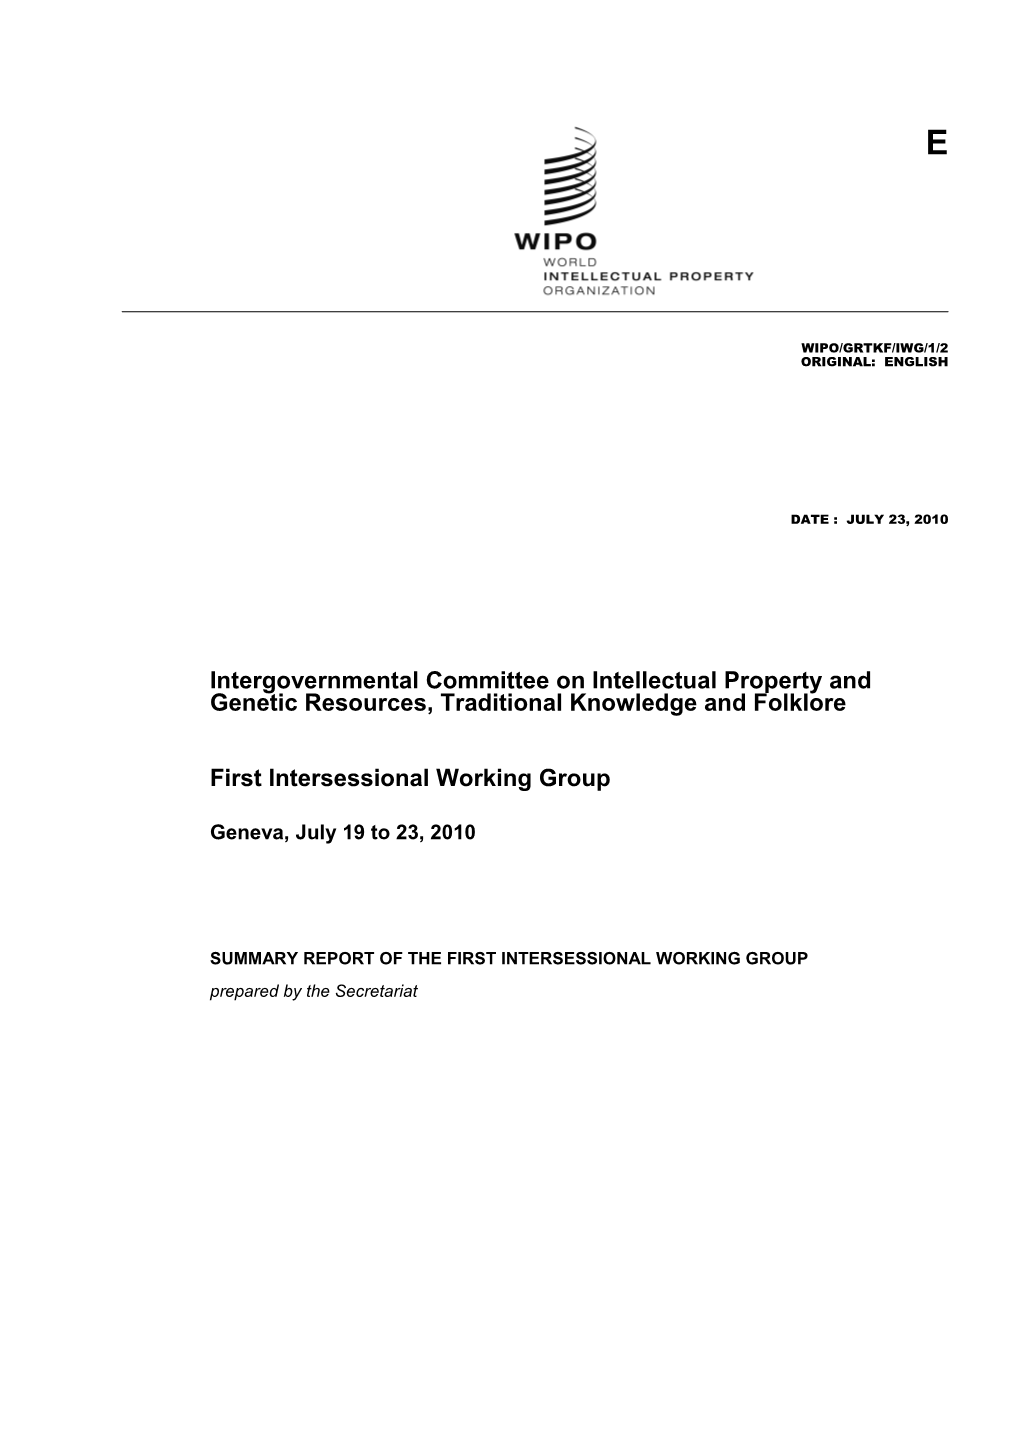 Summary Report of the First Intersessional Working Group